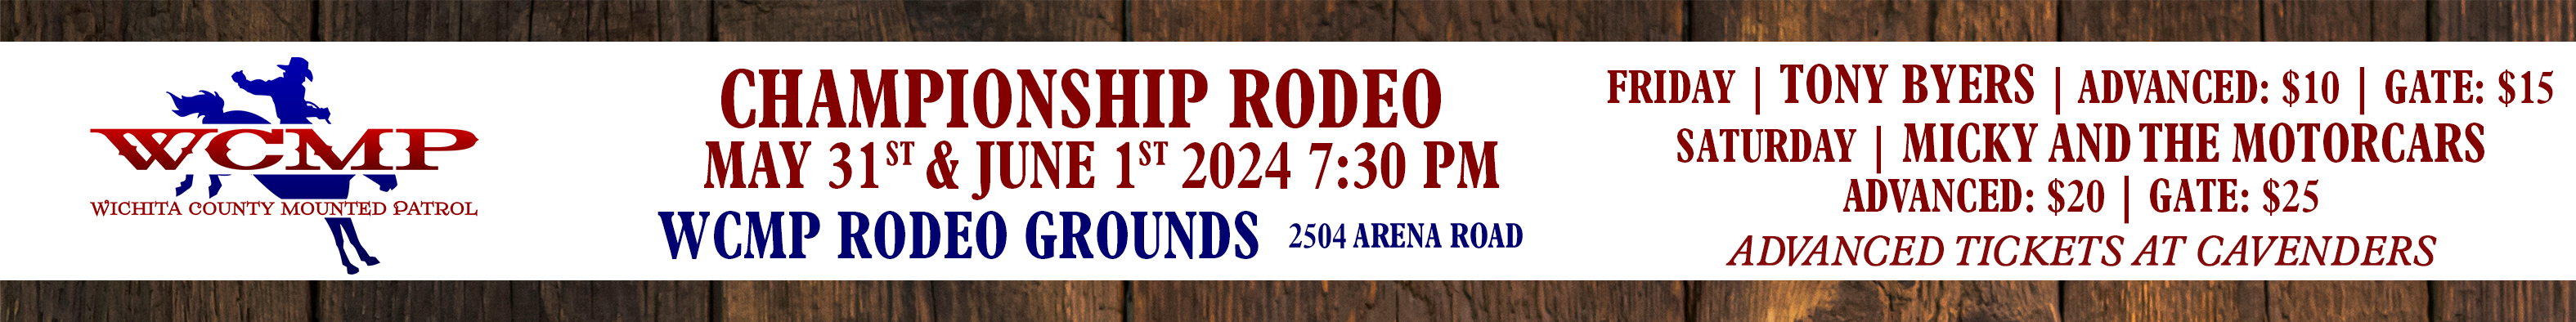 Wichita County Mounted Patrol Championship Rodeo May 31st and June 1st 2024 at 7:30 PM